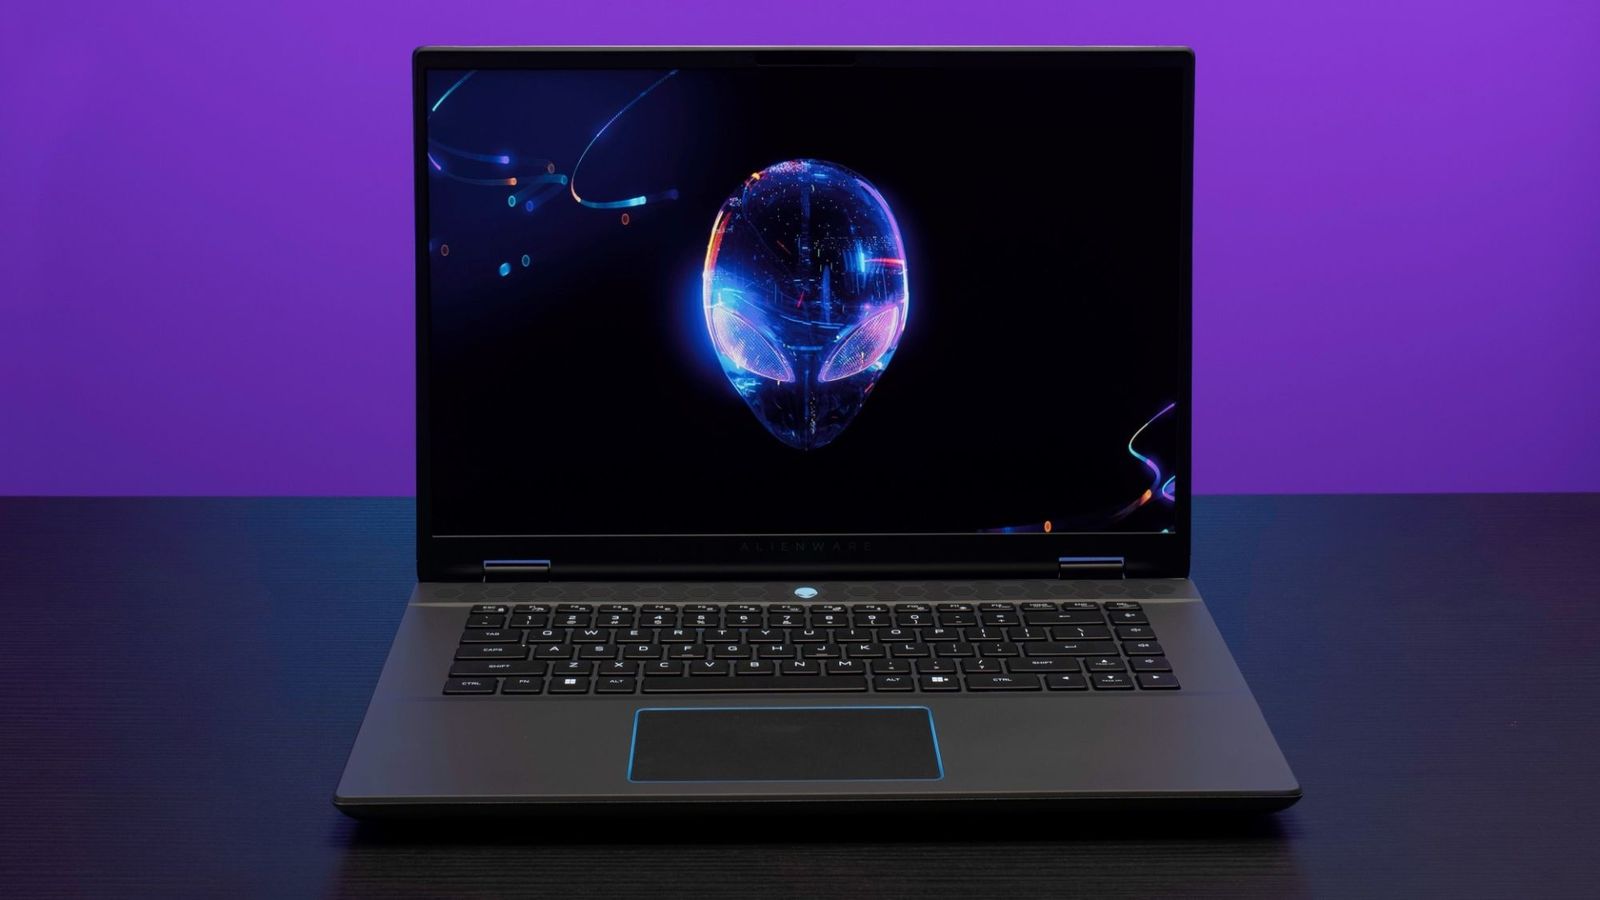 An image of the Alienware m16 R2